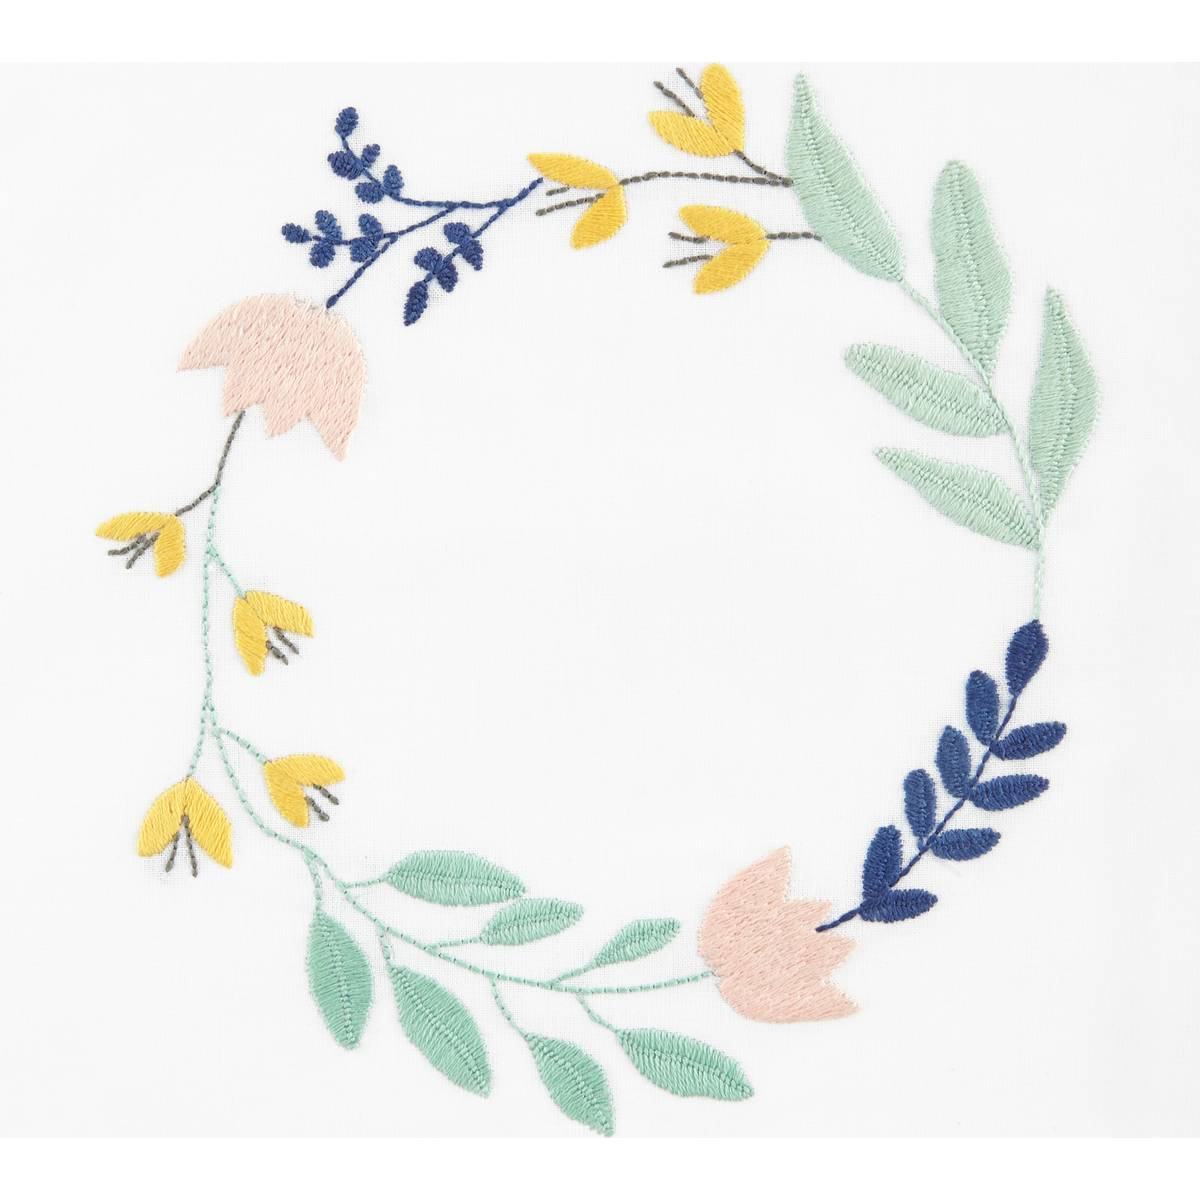 Embroidery Pattern Free Pattern Dmc Floral Wreath Embroidery 0054 Hobcraft